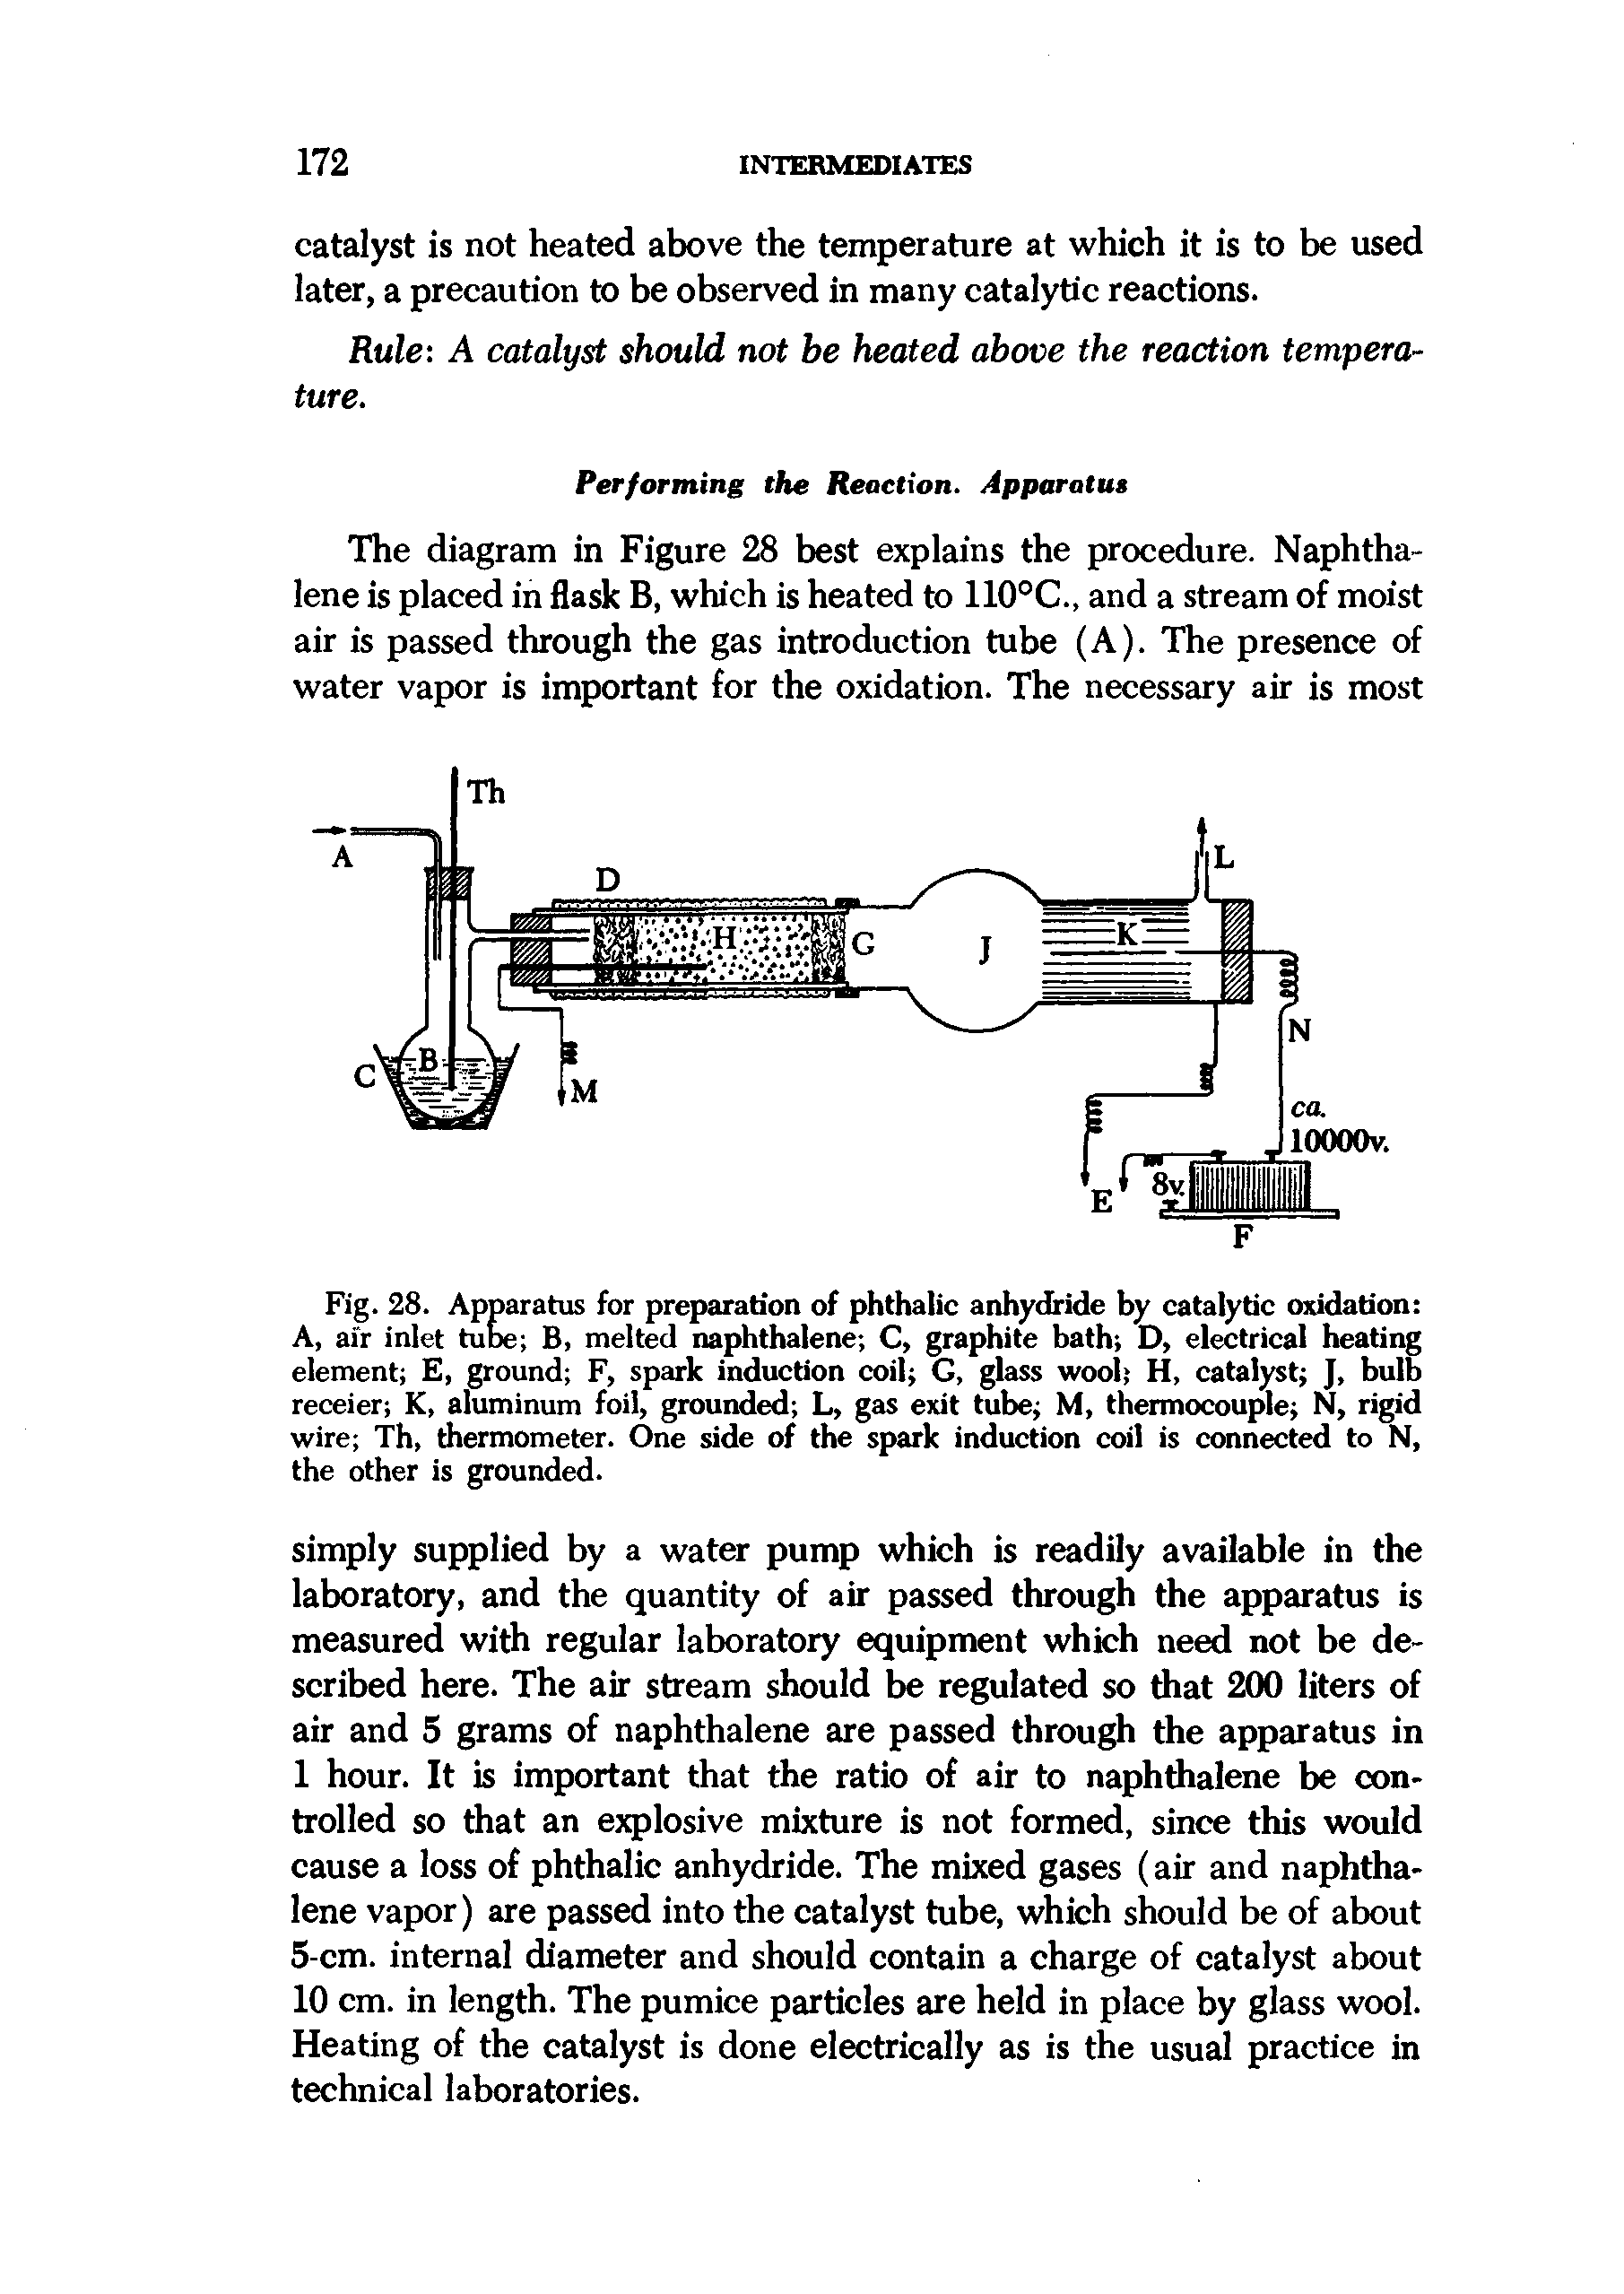 Fig. 28. Apparatus for preparation of phthalic anhy<L ide by catalytic oxidation A, air inlet tube B, melted naphthalene C, graphite bath D, electrical heating element E, ground F, spark induction coil G, glass wool H, catalyst J, bulb receier K, aluminum foil, grounded L, gas exit tube M, thermocouple N, rigid wire Th, thermometer. One side of the spark induction coil is connected to N, the other is grounded.